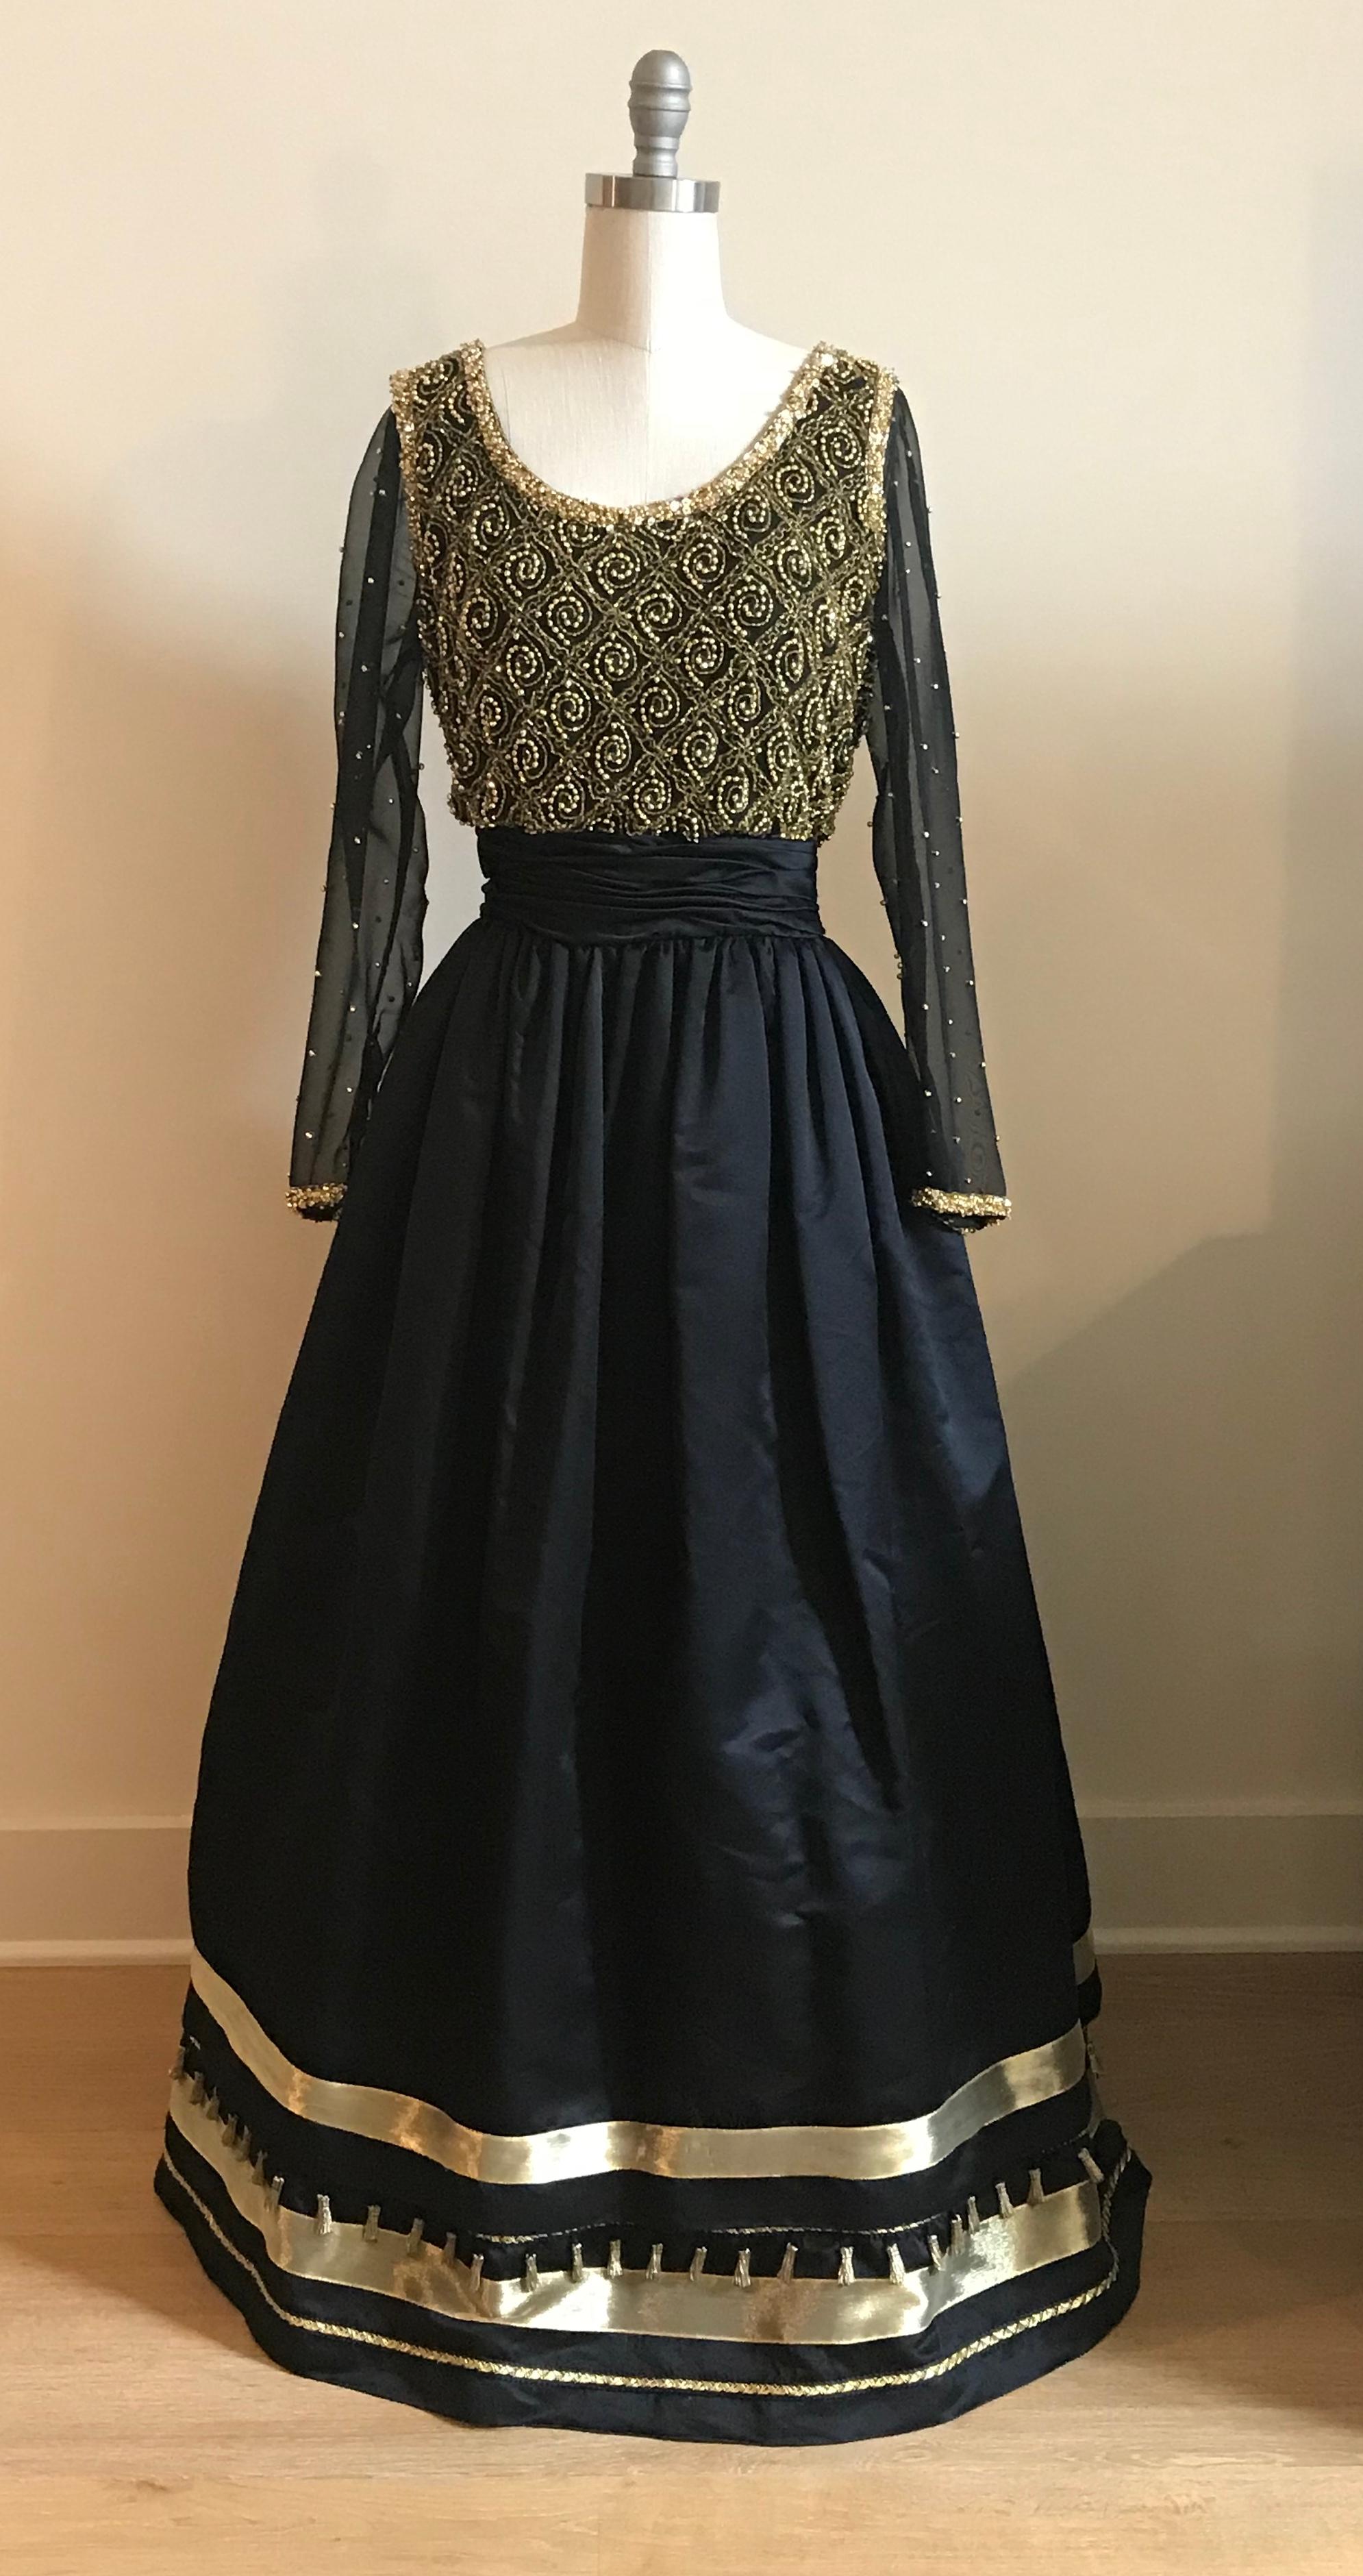 Amazing long sleeve black Victoria Royal Ltd. full length gown with gold bead embellishment at bodice and sleeves. Gold ribbon trim at hem and tiny gold tassels adorn the bottom. Back zip with concealed snaps that fasten over zipper at upper back